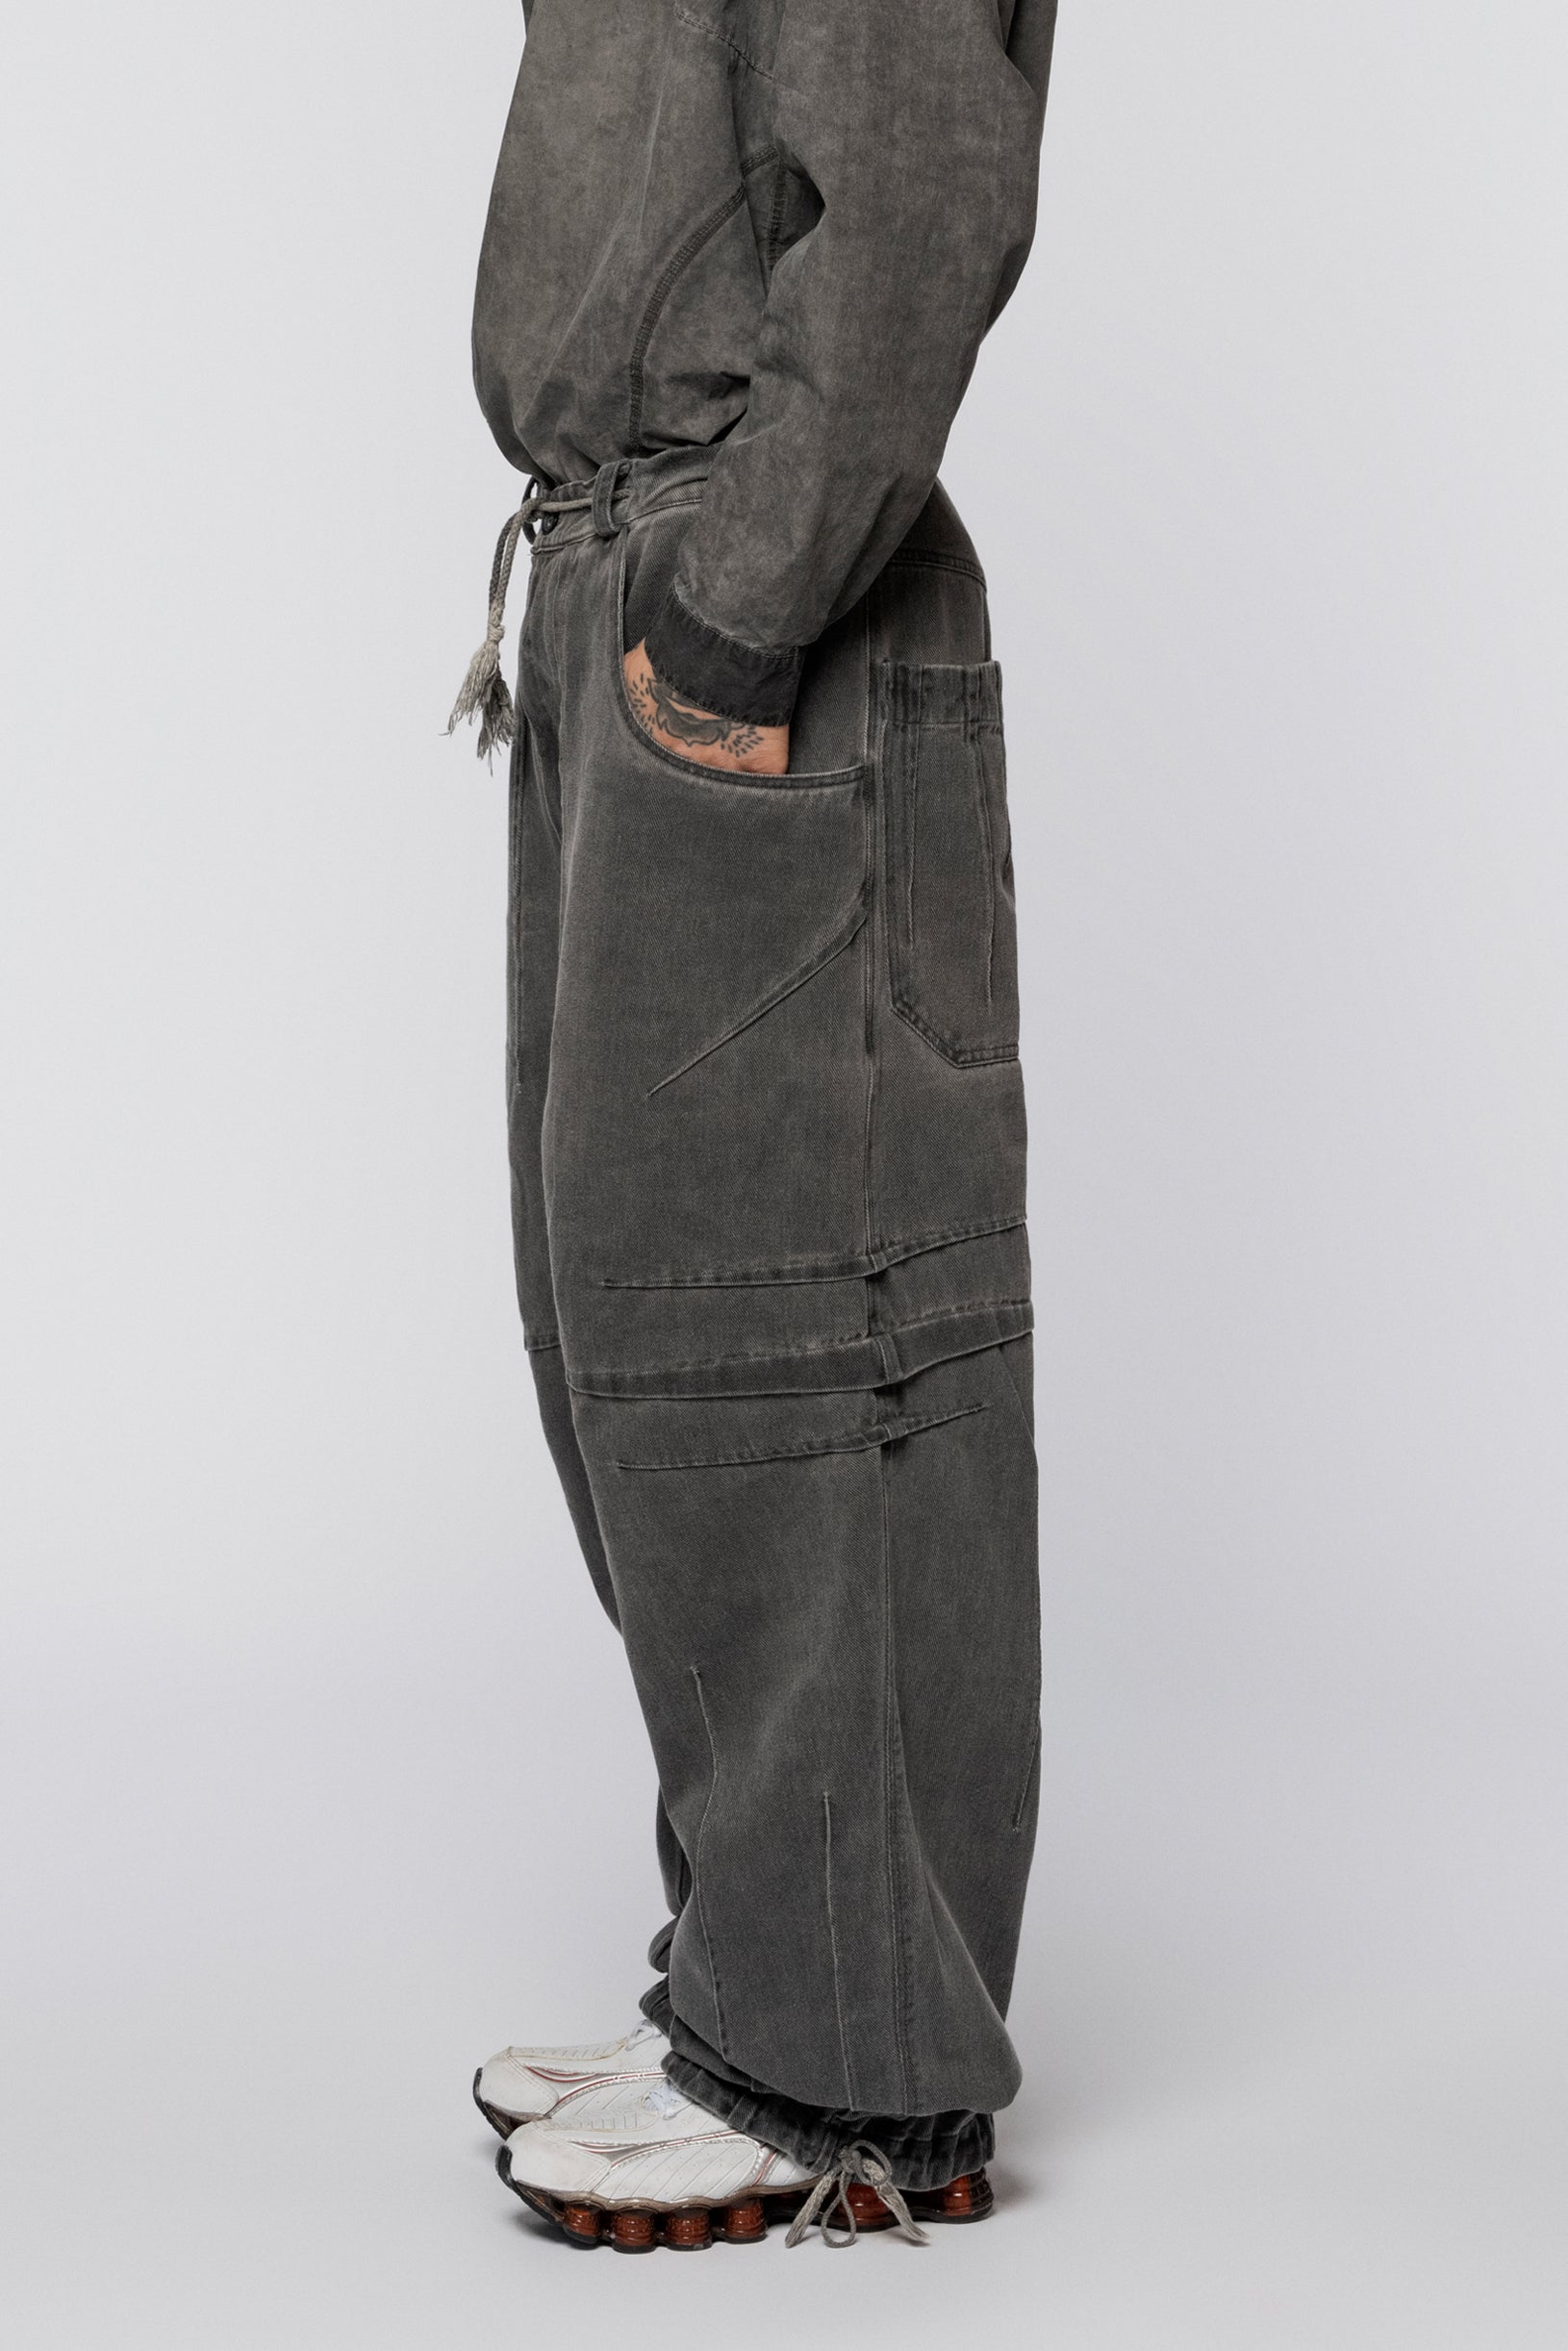 Denim Trousers Folds Grey Old Dyed